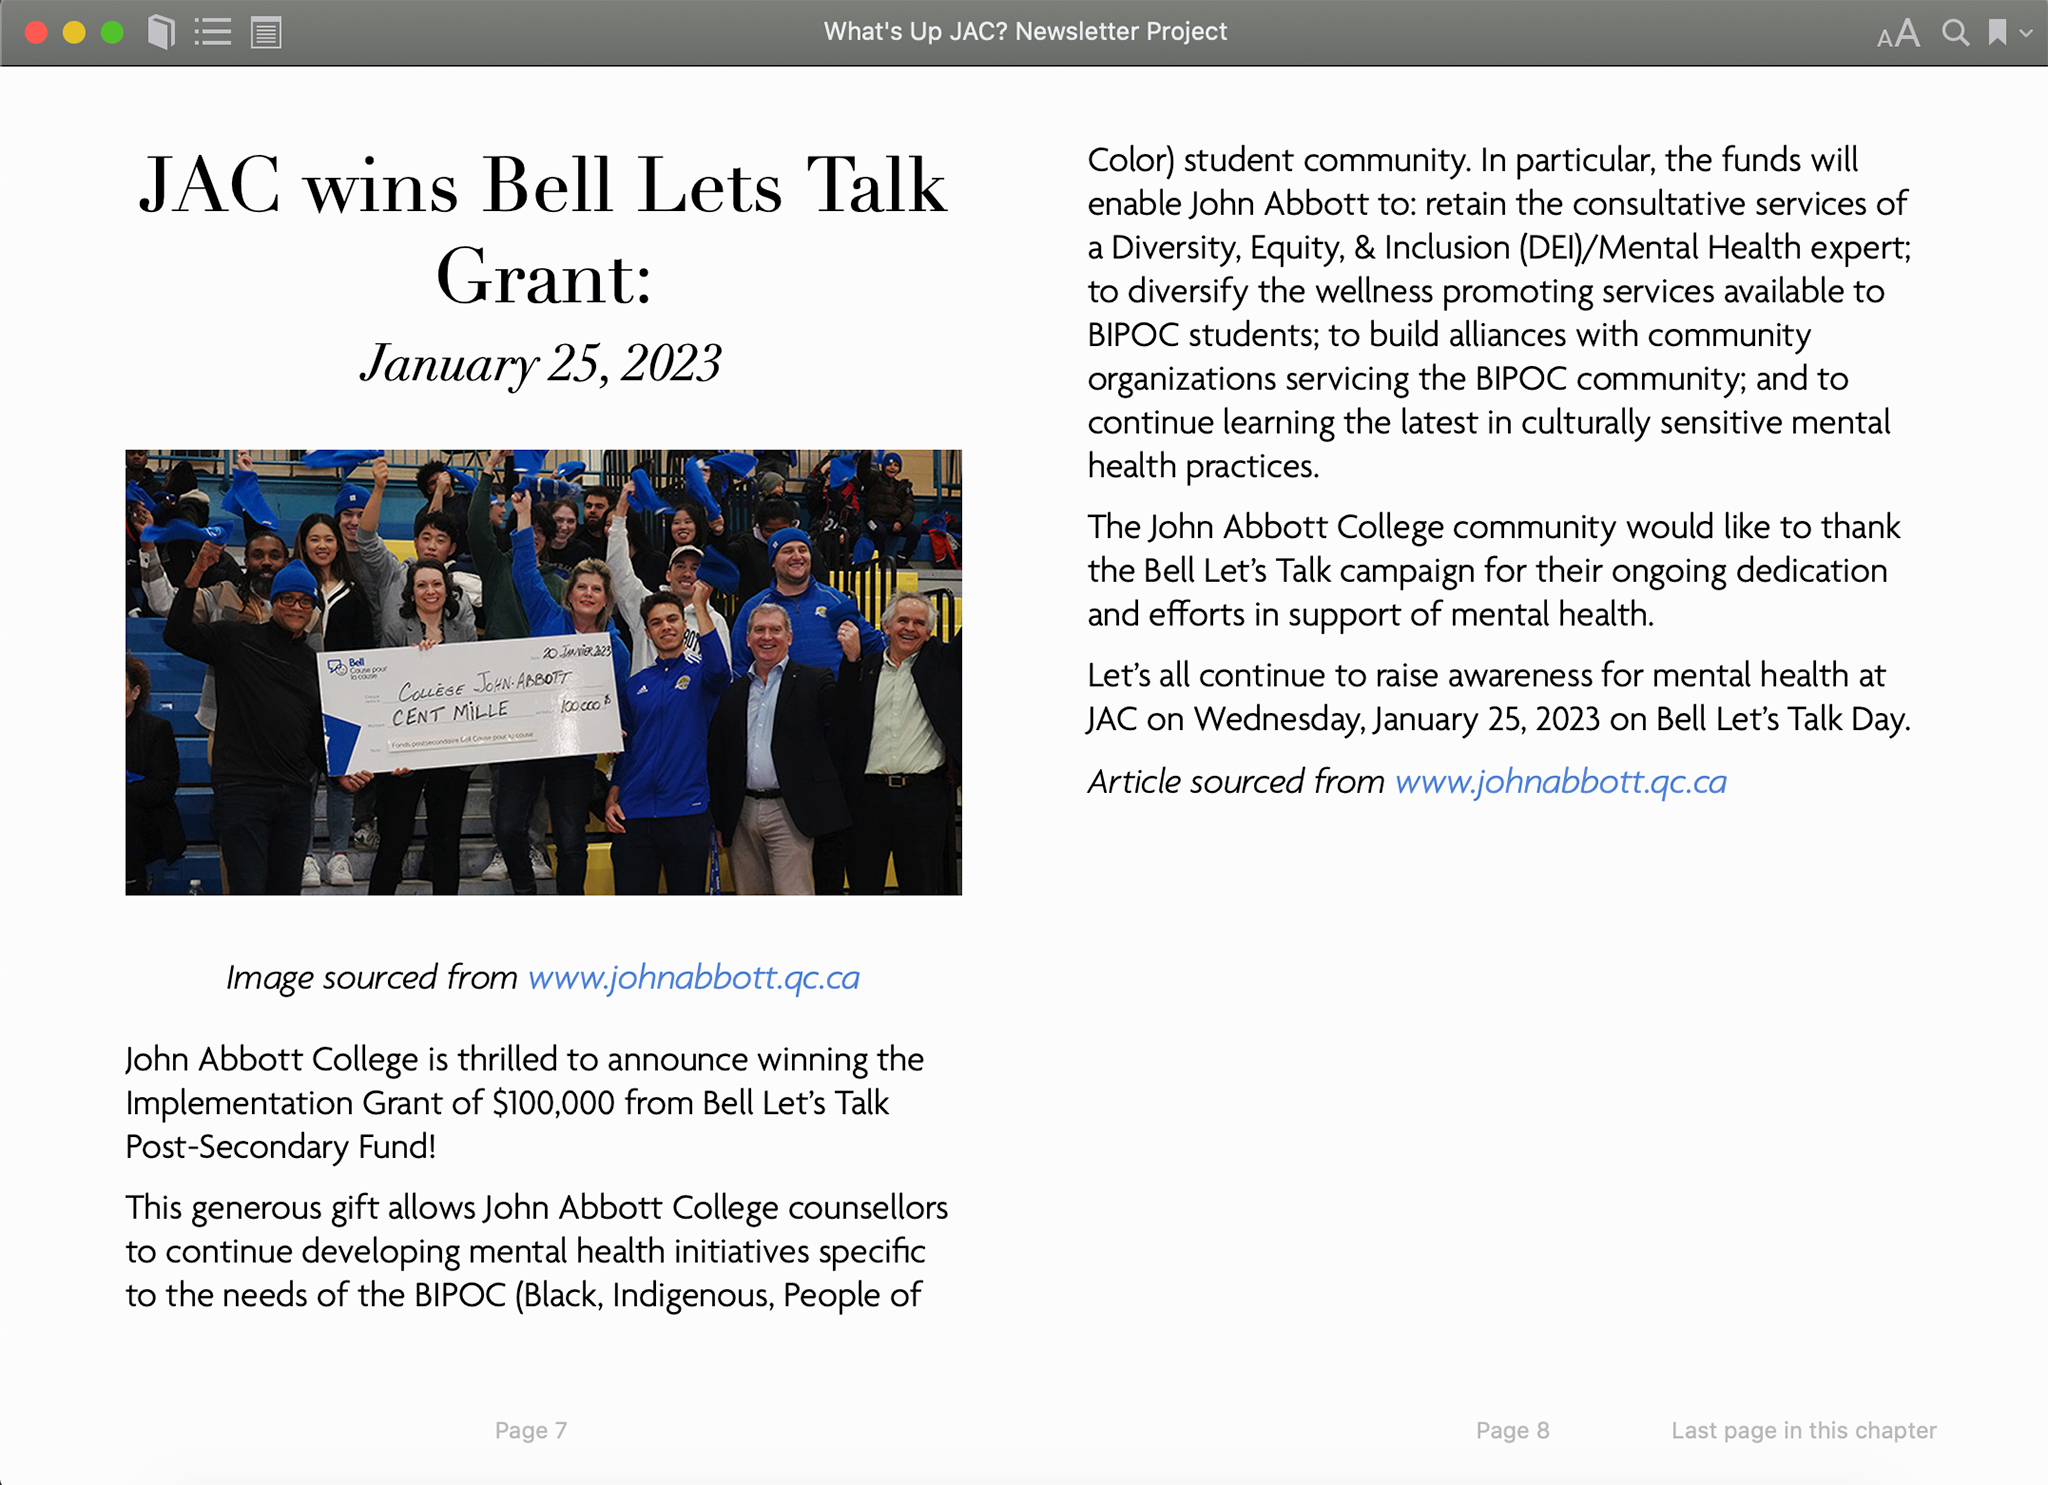 Screenshot of an ebook I created for a hypothetical college newsletter.